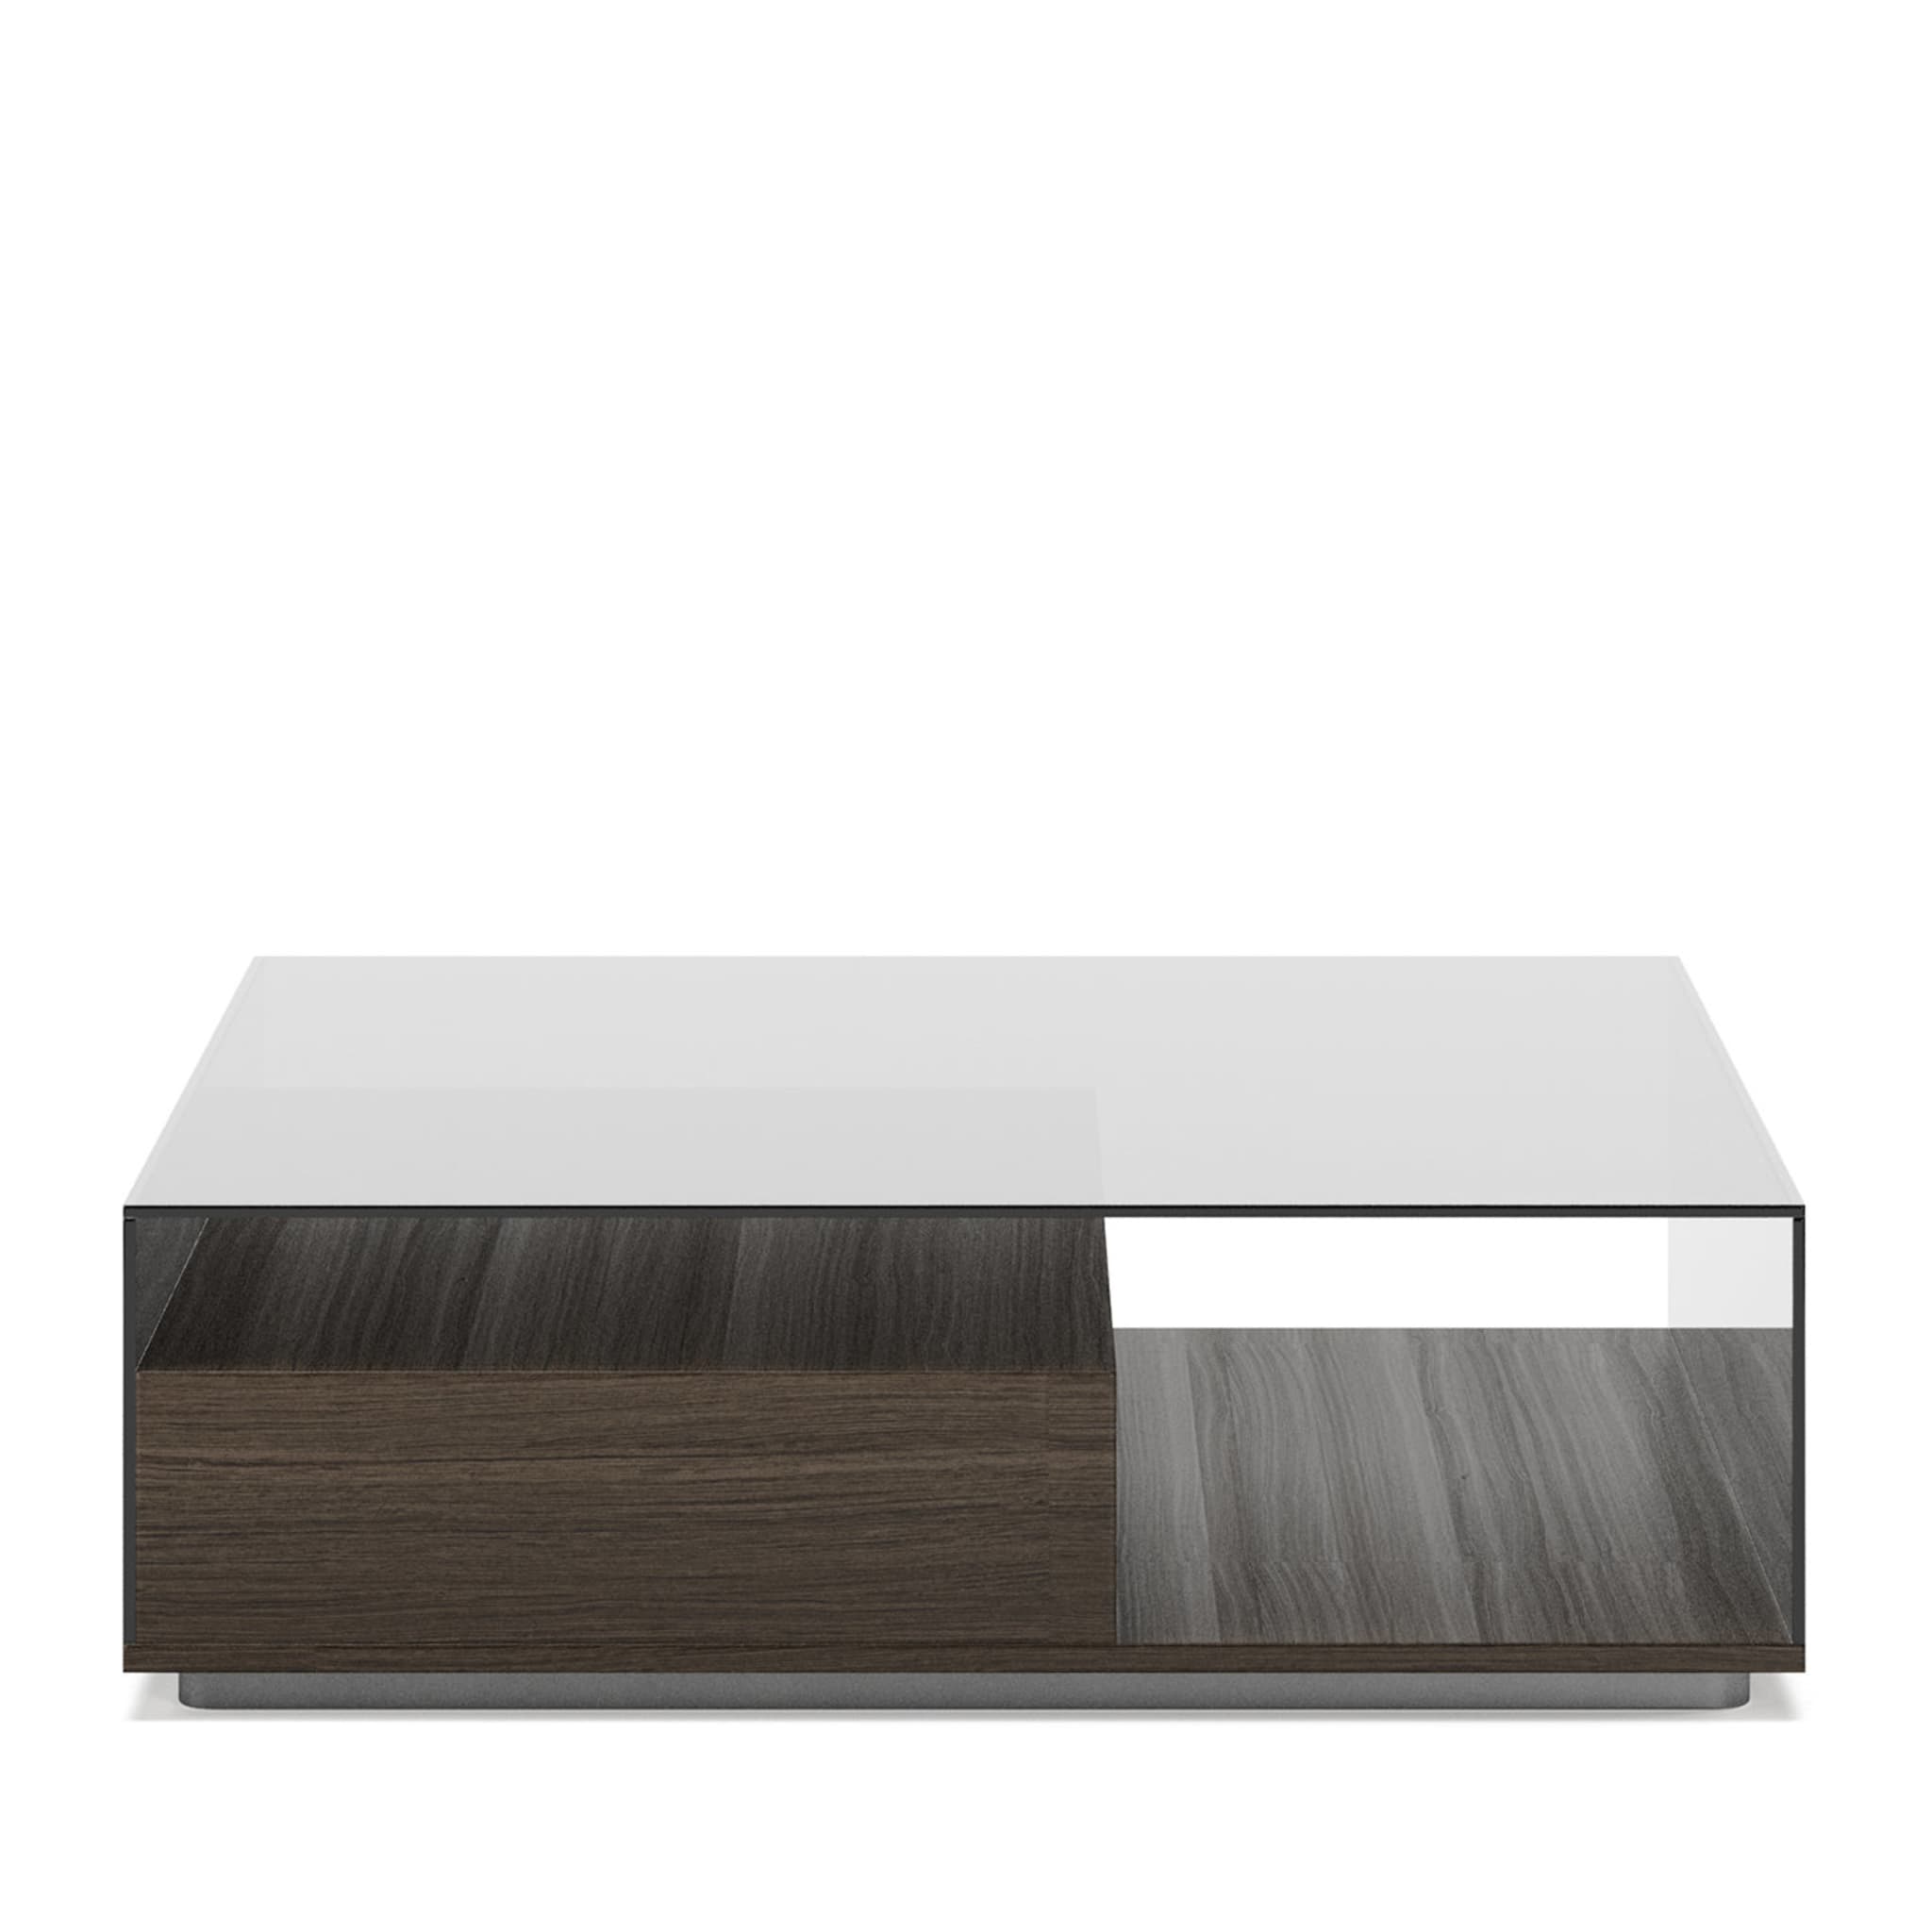 Peter Coffee Table - Alternative view 1